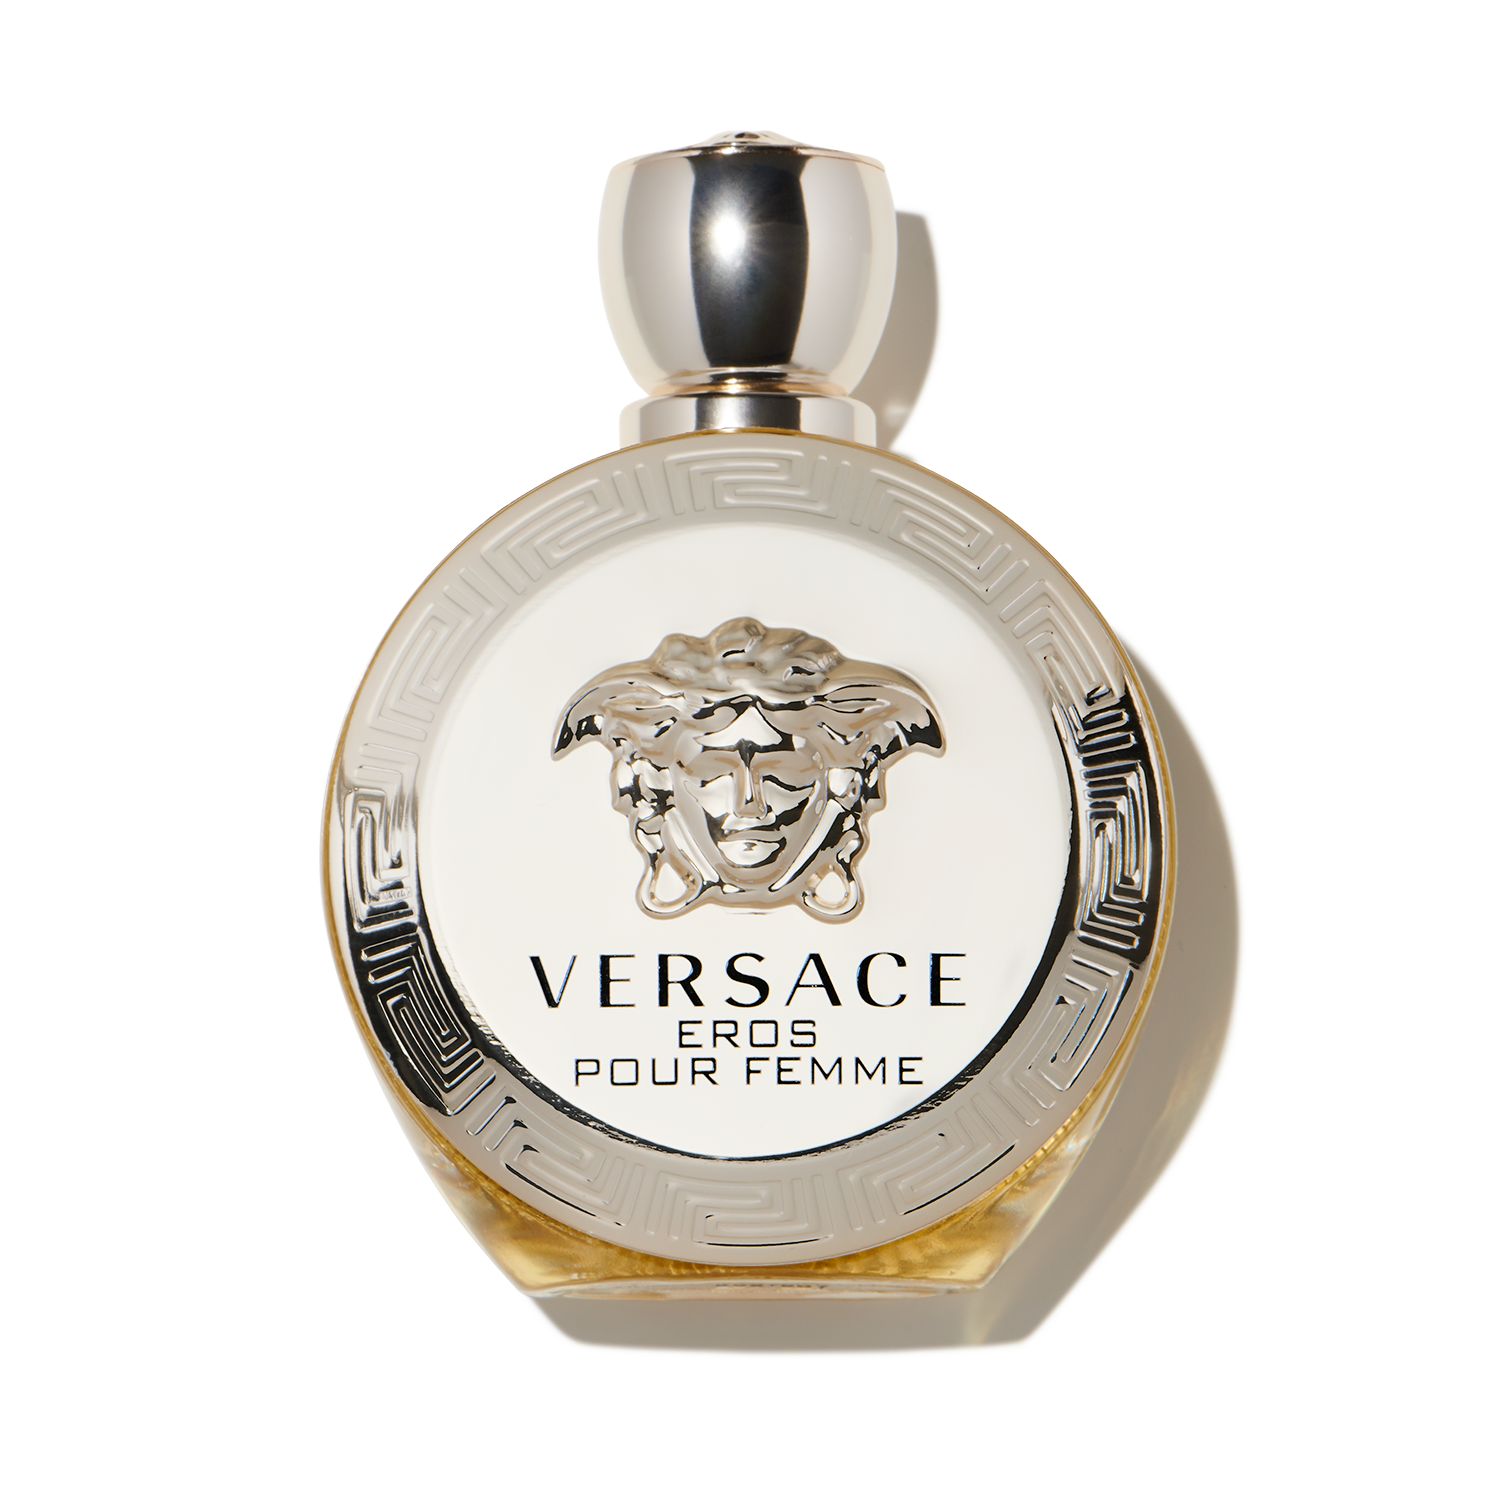 Buy VERSACE Eros Pour Femme at Scentbird for $16.95